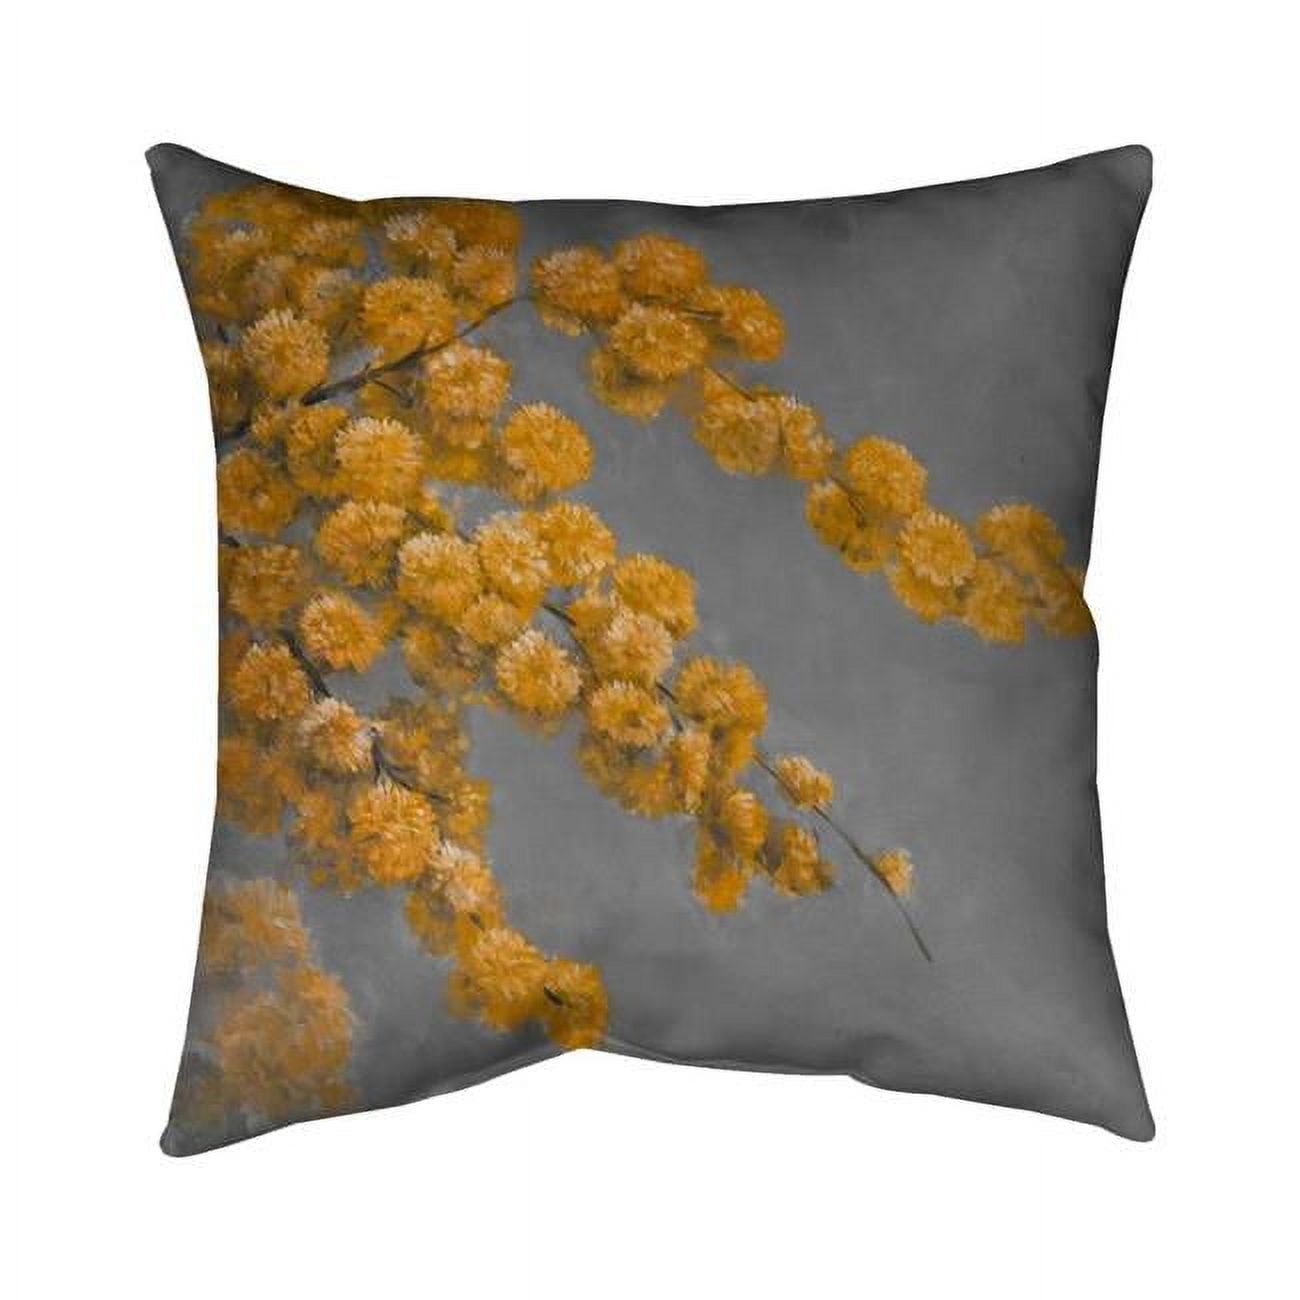 Begin Home Decor 5543-1616-FL141 16 x 16 in. Golden Wattle Plant-Double Sided Print Indoor Pillow Cover